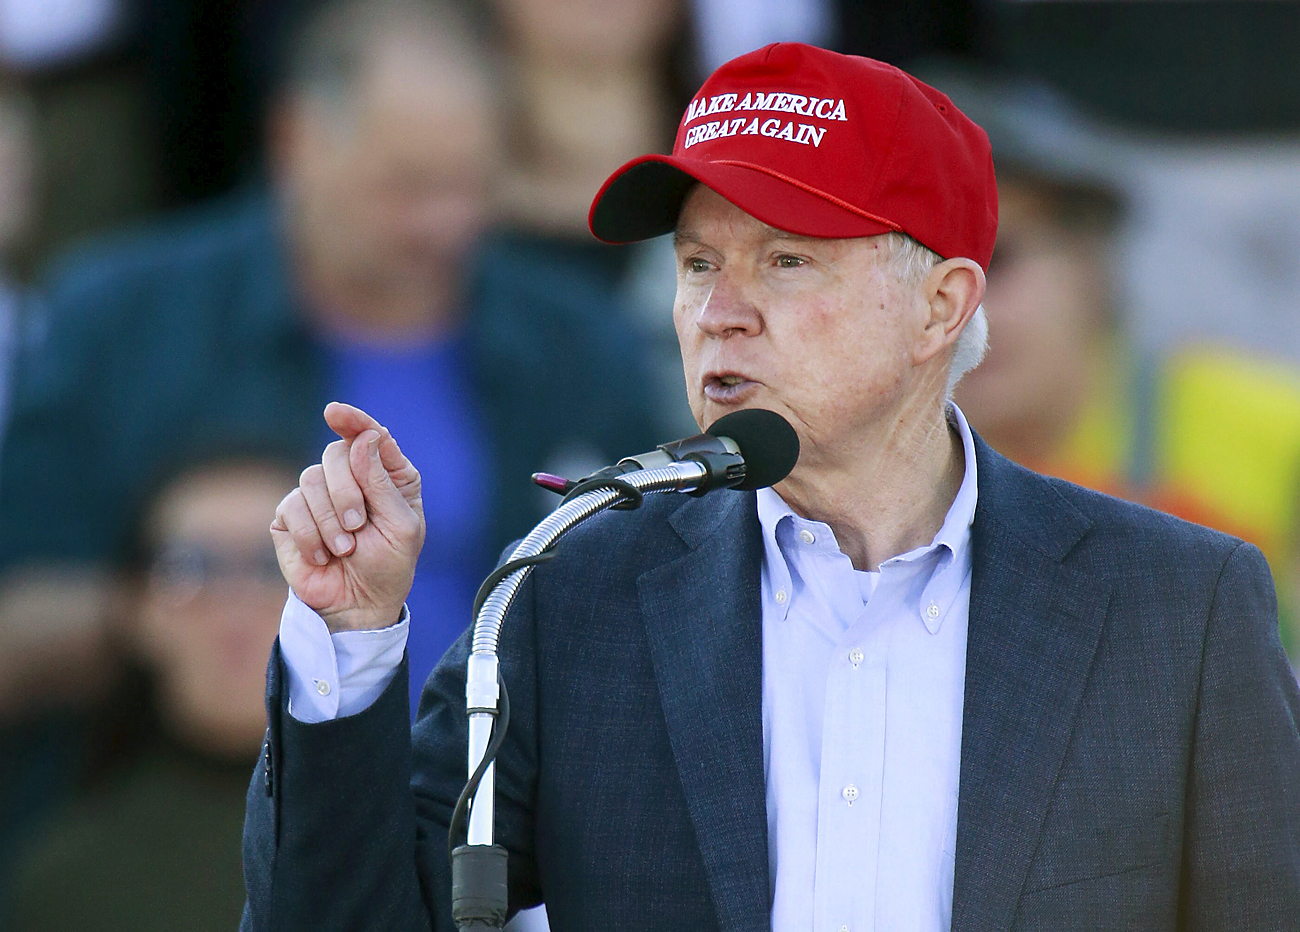 U.S. Senator Jeff Sessions speaks to supporters of U.S. Republican presidential candidate Donald Trump after he endorsed Trump at a rally at Madison City Schools Stadium in Madison, Alabama, Feb. 28, 2016 Source: Reuters